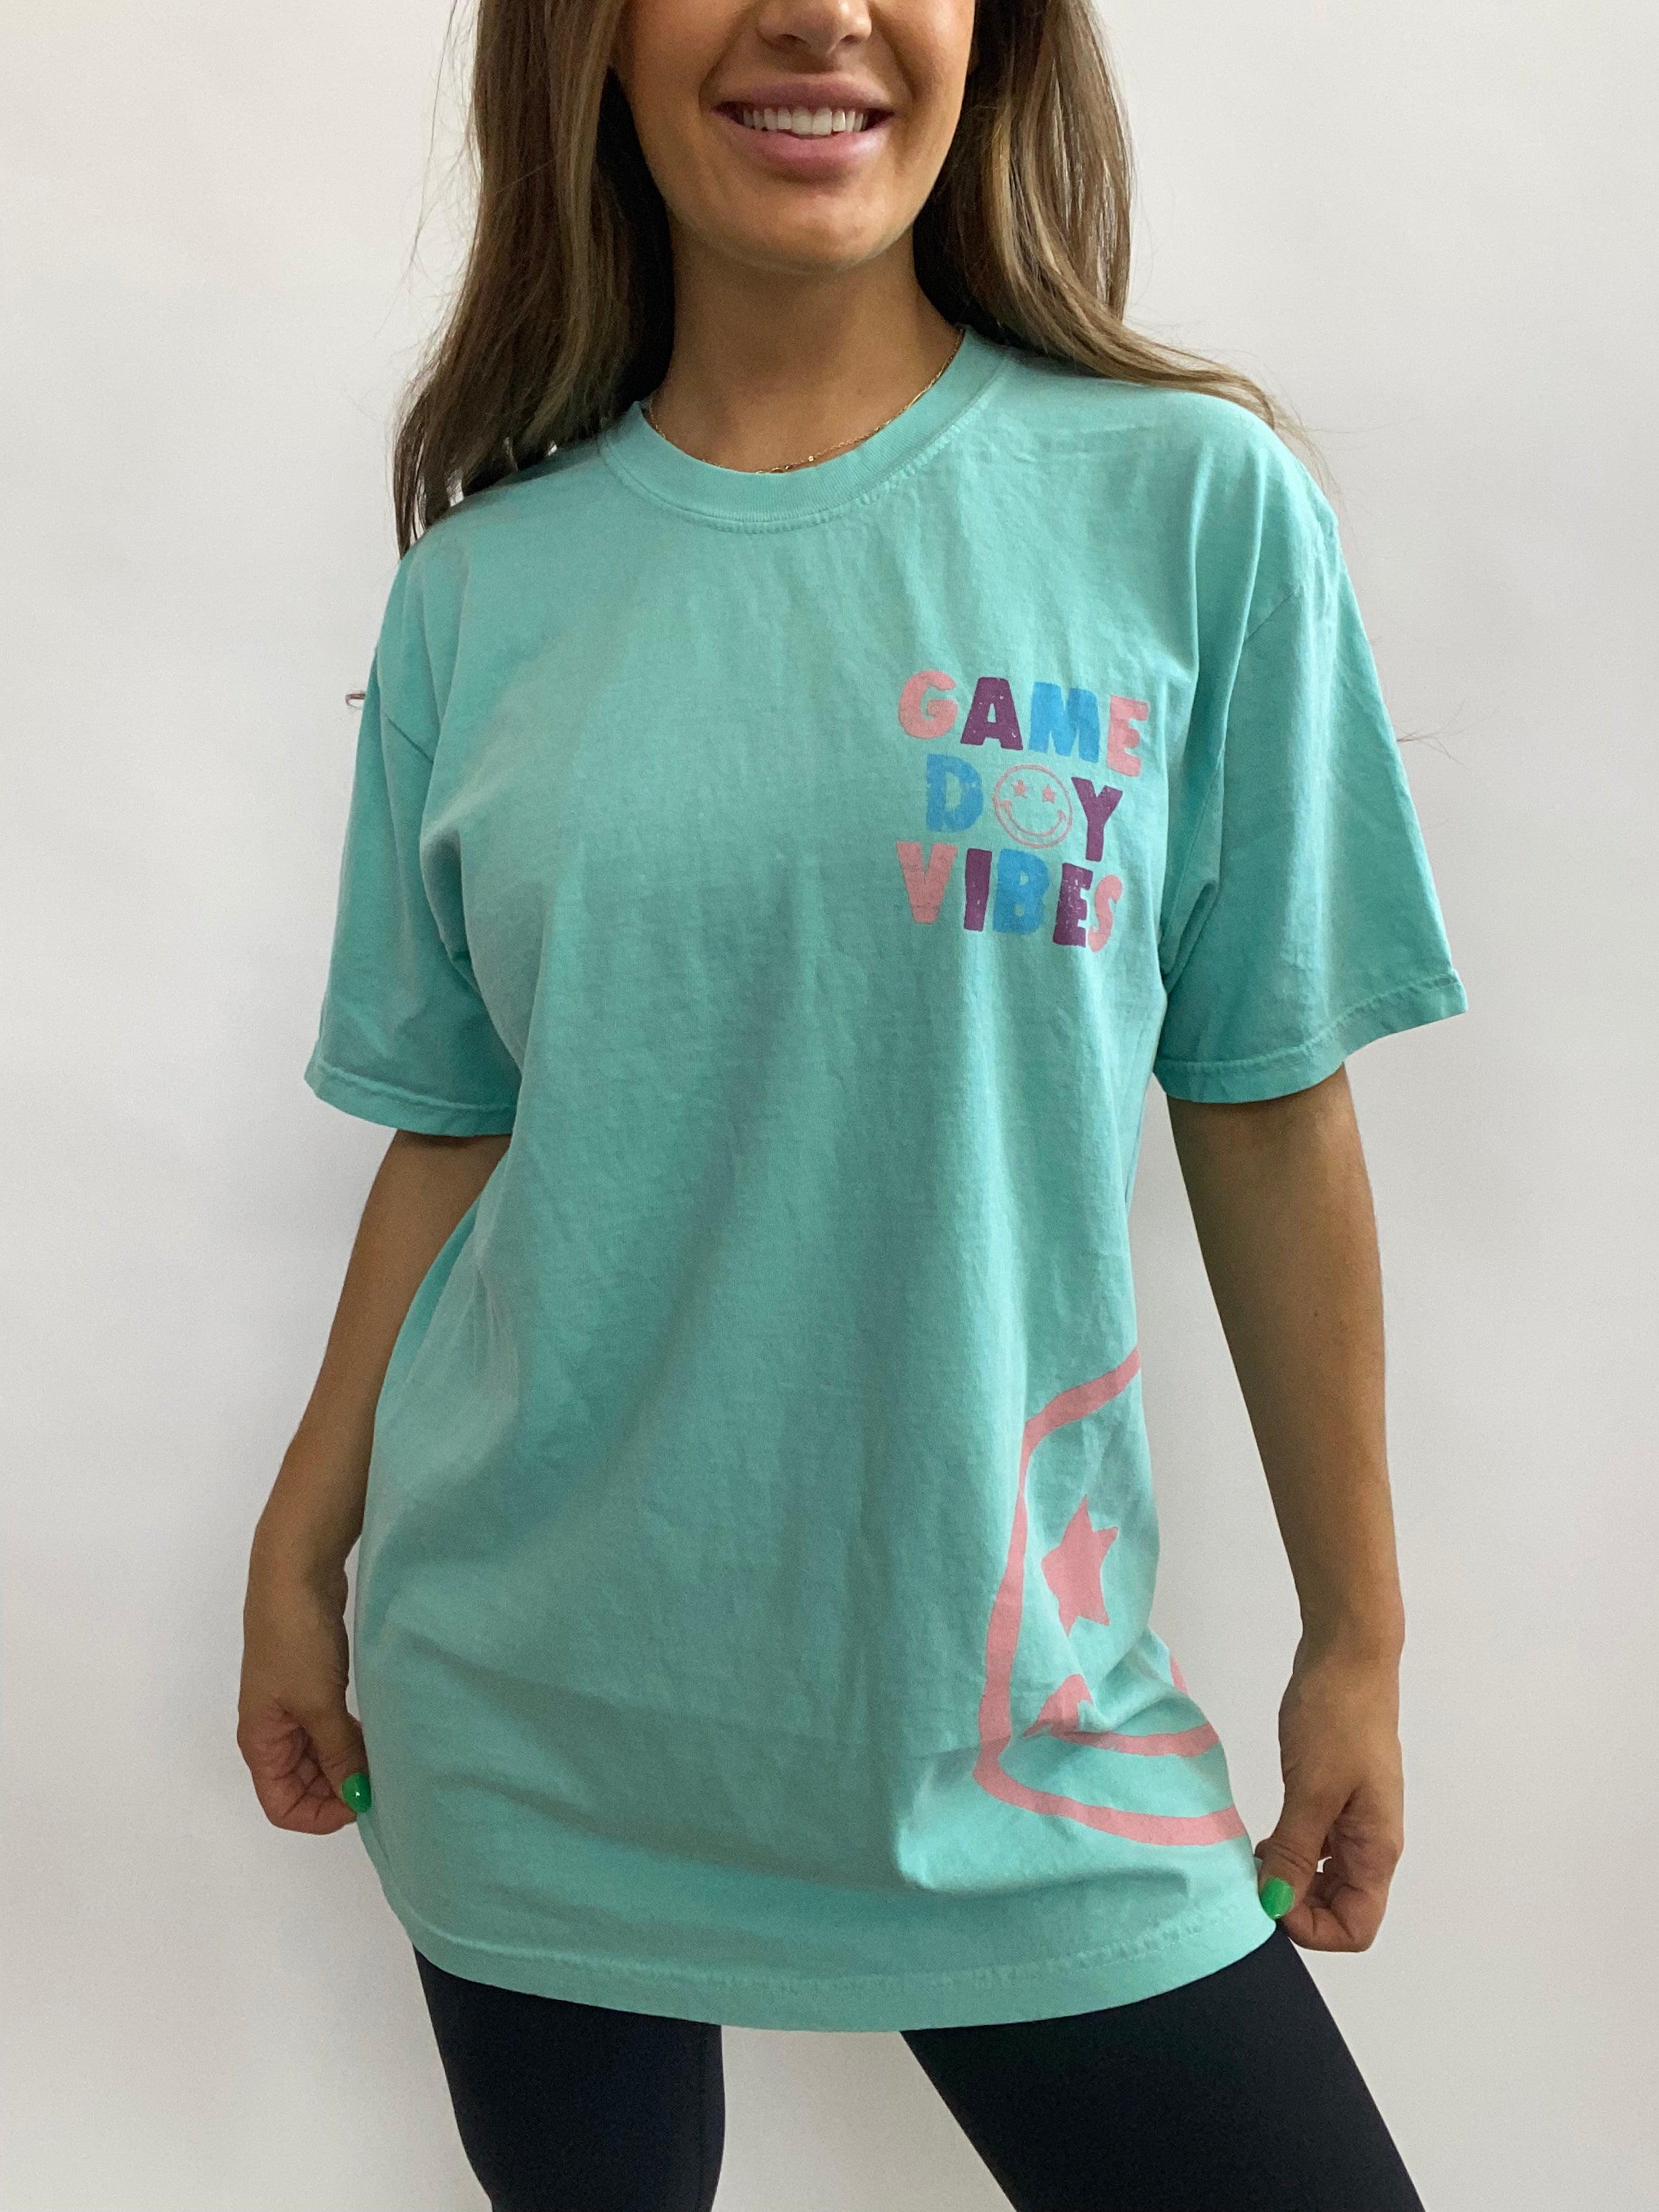 Game Day Vibes Oversized Graphic Tee - Chalky Mint